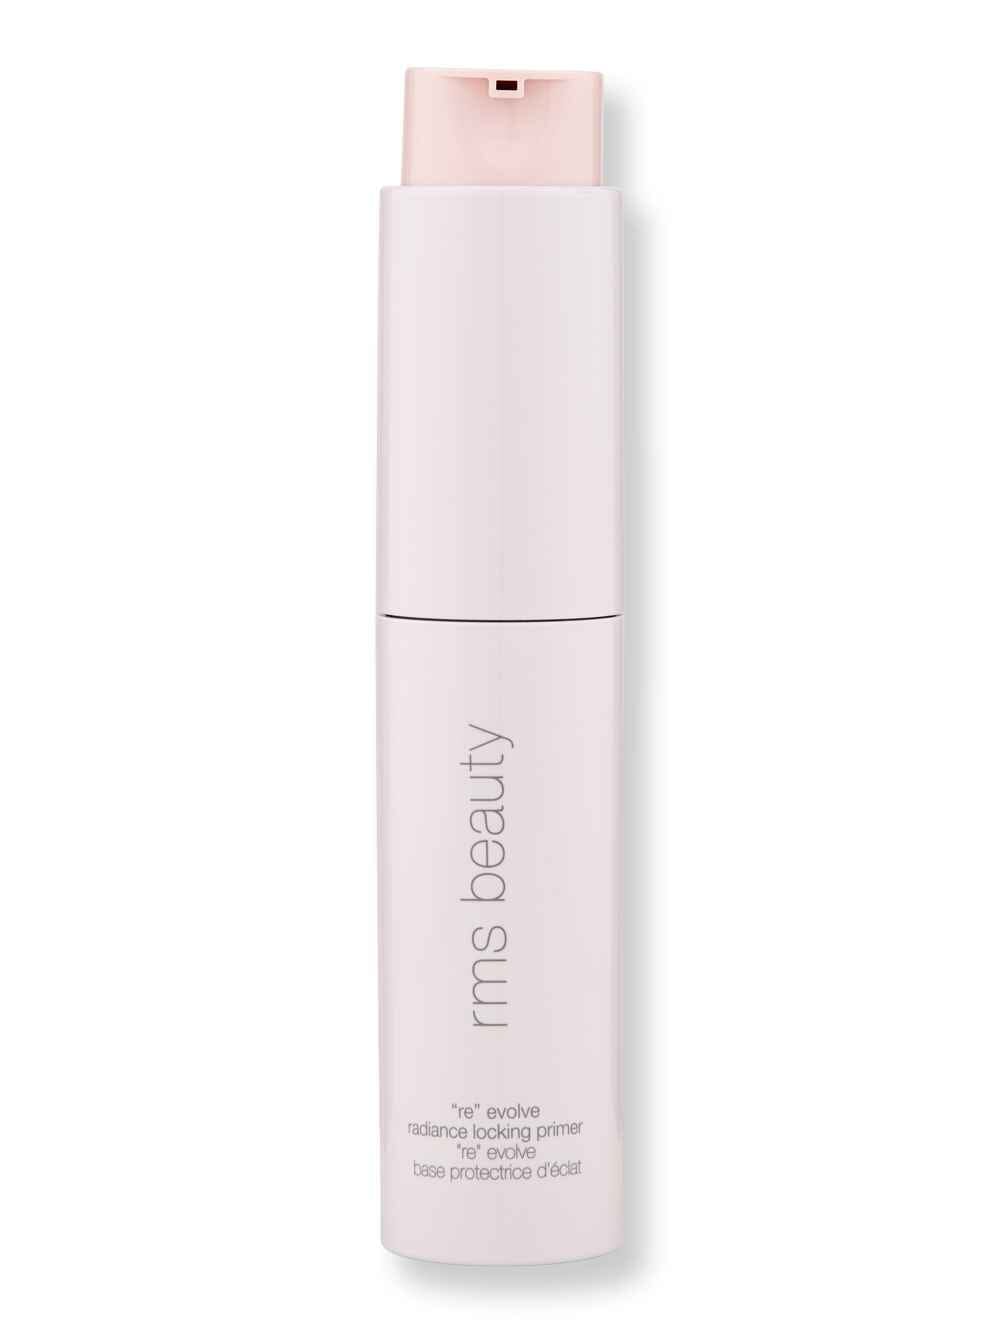 RMS Beauty RMS Beauty ReEvolve Radiance Locking Primer Face Primers 